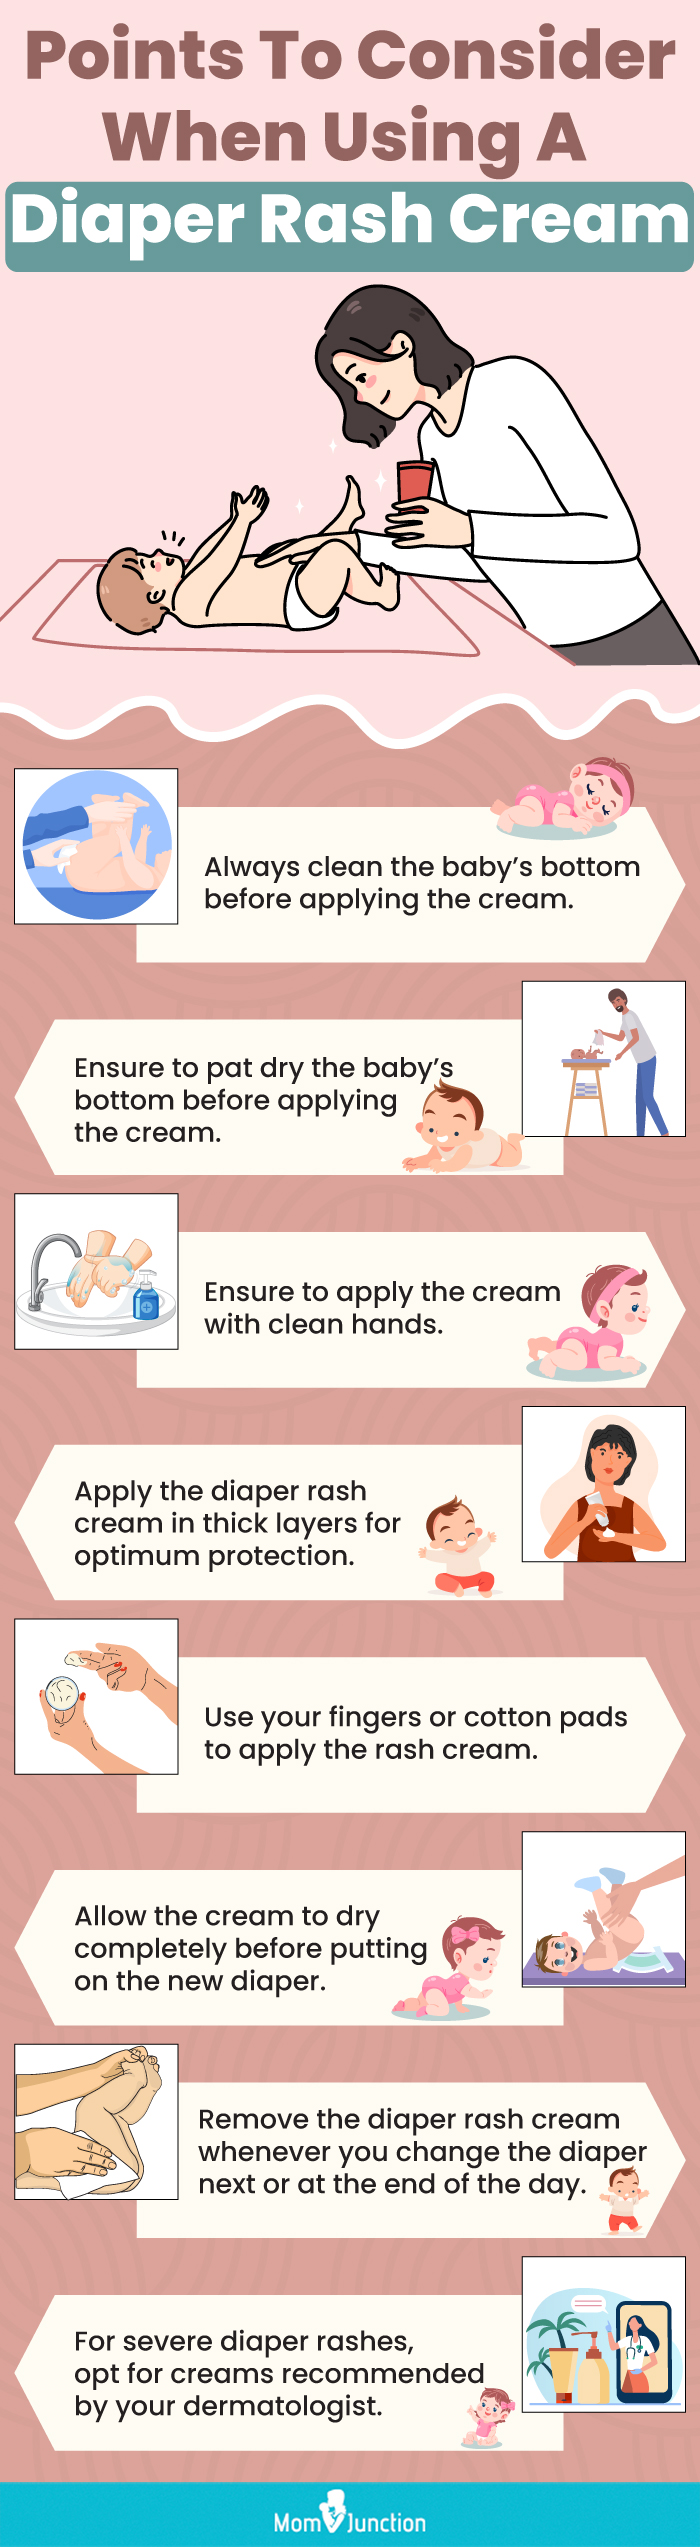 Points To Consider When Using A Diaper Rash Cream (infographic)